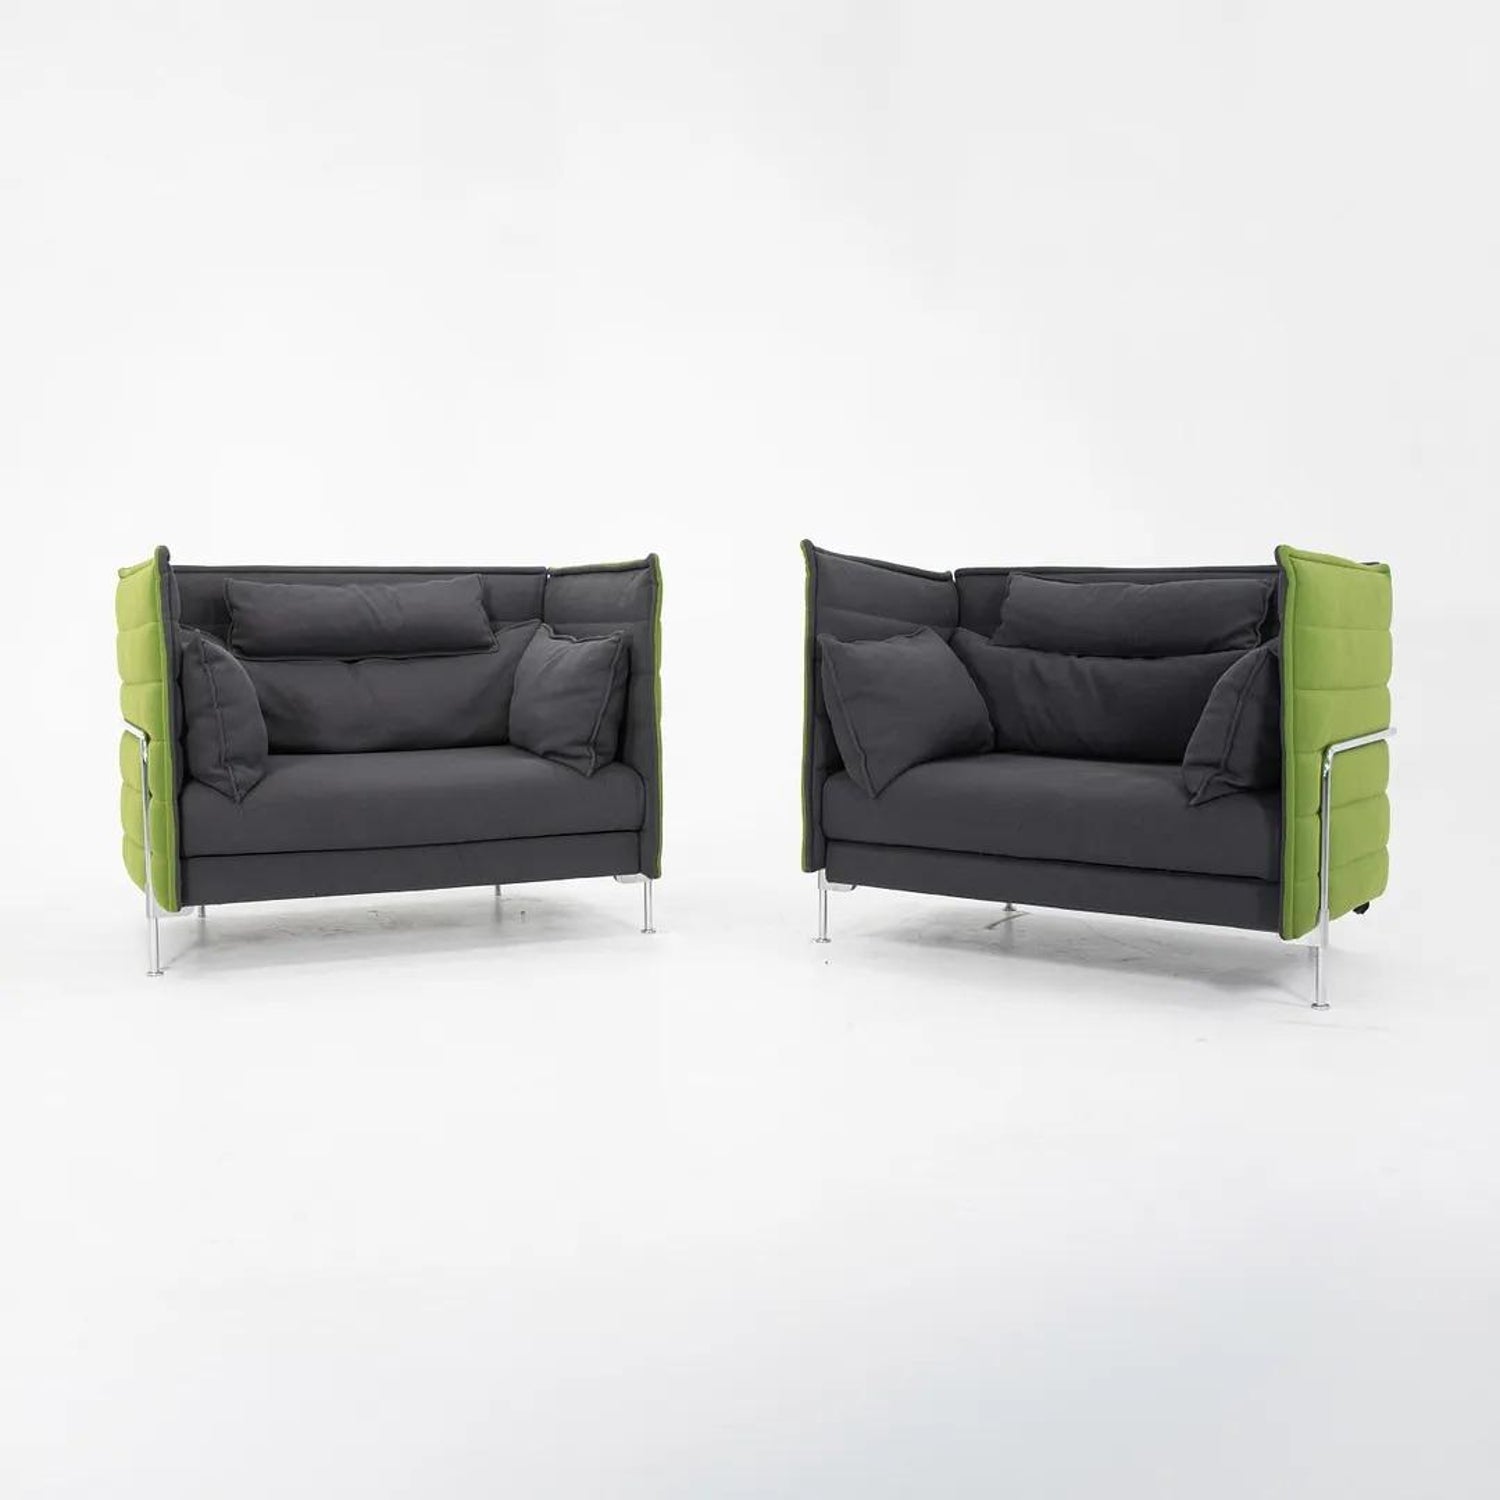 Vitra "Alcove" Three-Seat Sofa in Black "Credo" and Leather by R and E  Bouroullec at 1stDibs | r and d leather, alcove seating, vitra credo